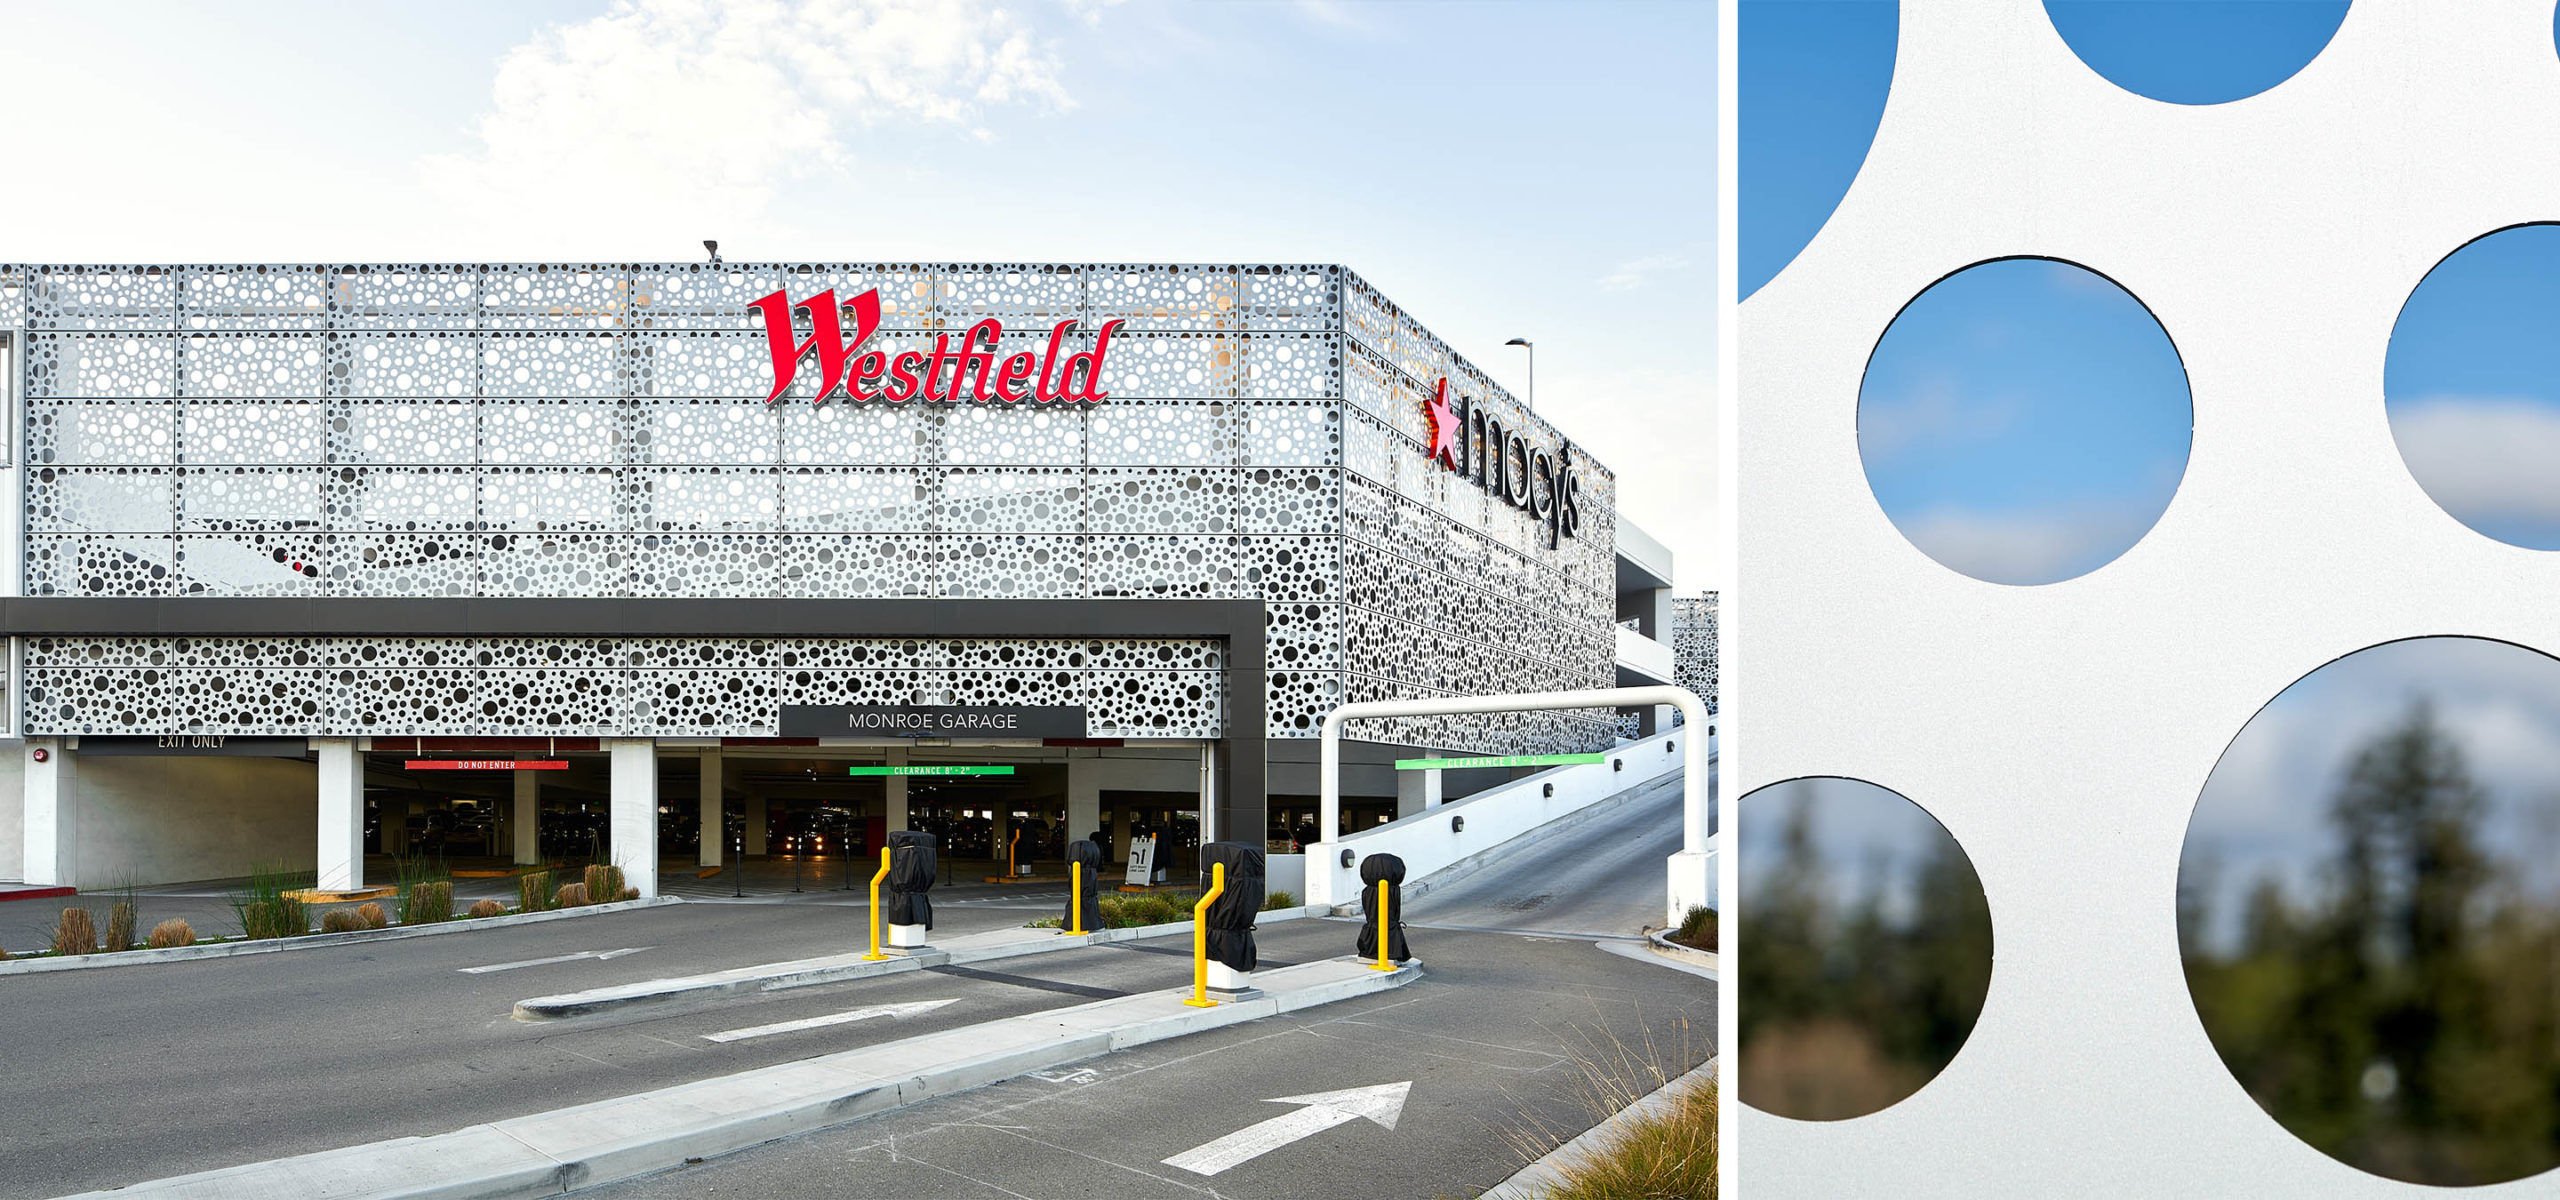 WESTFIELD VALLEY FAIR EXPANSION OPENS REIMAGINED SHOPPING